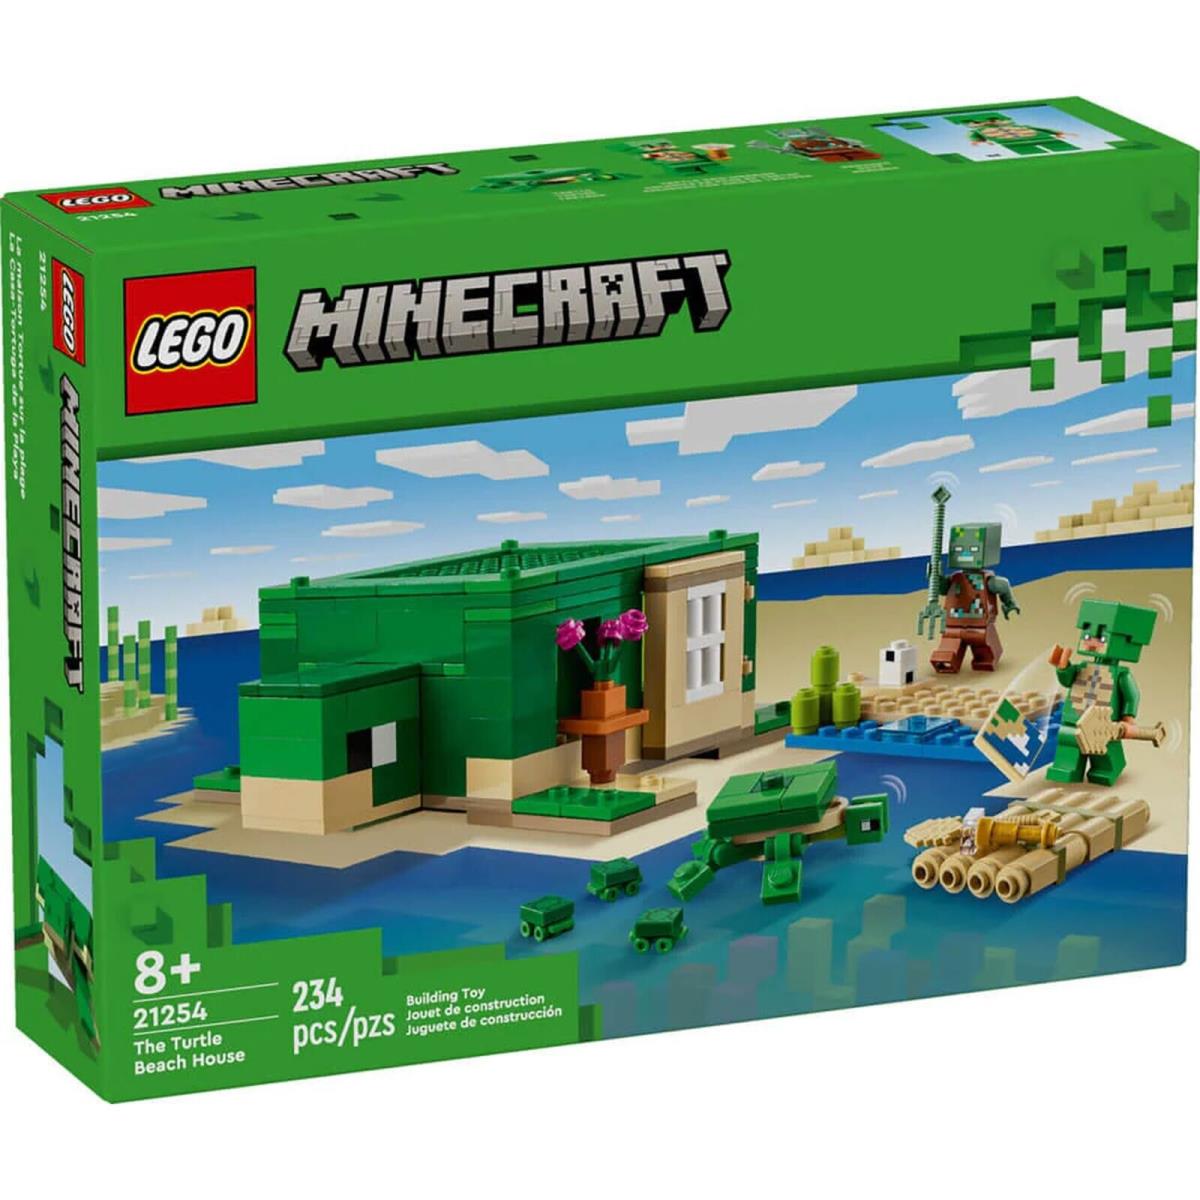 Lego Minecraft The Turtle Beach House Building Set 21254 IN Stock